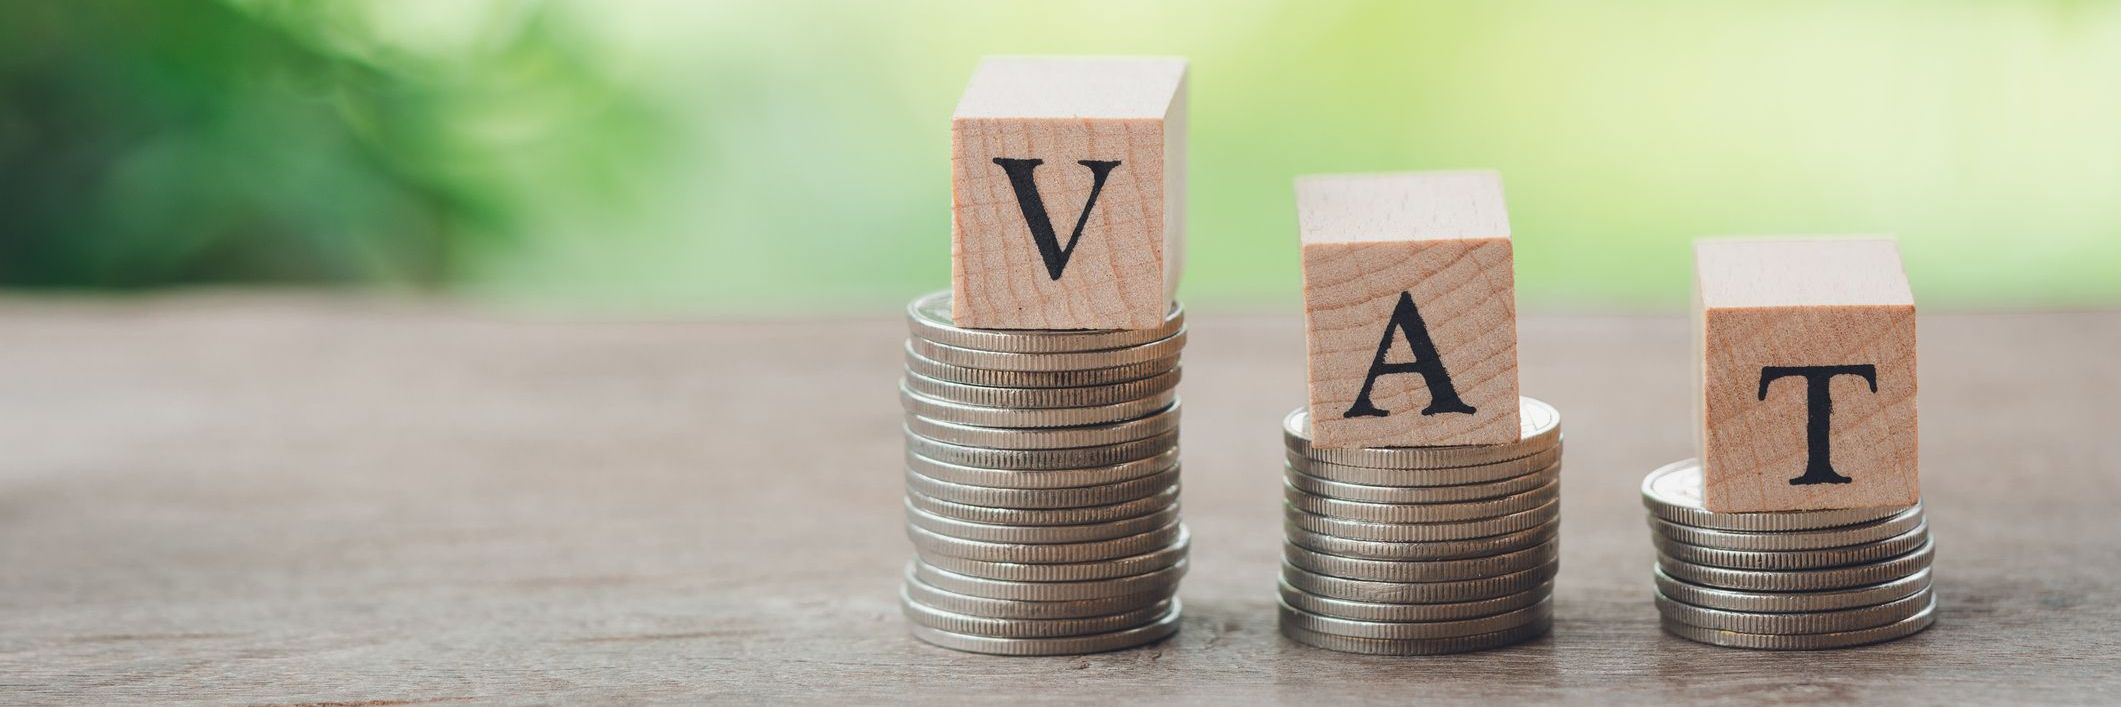 Business v Non-Business VAT - The Constant Challenge for Charities